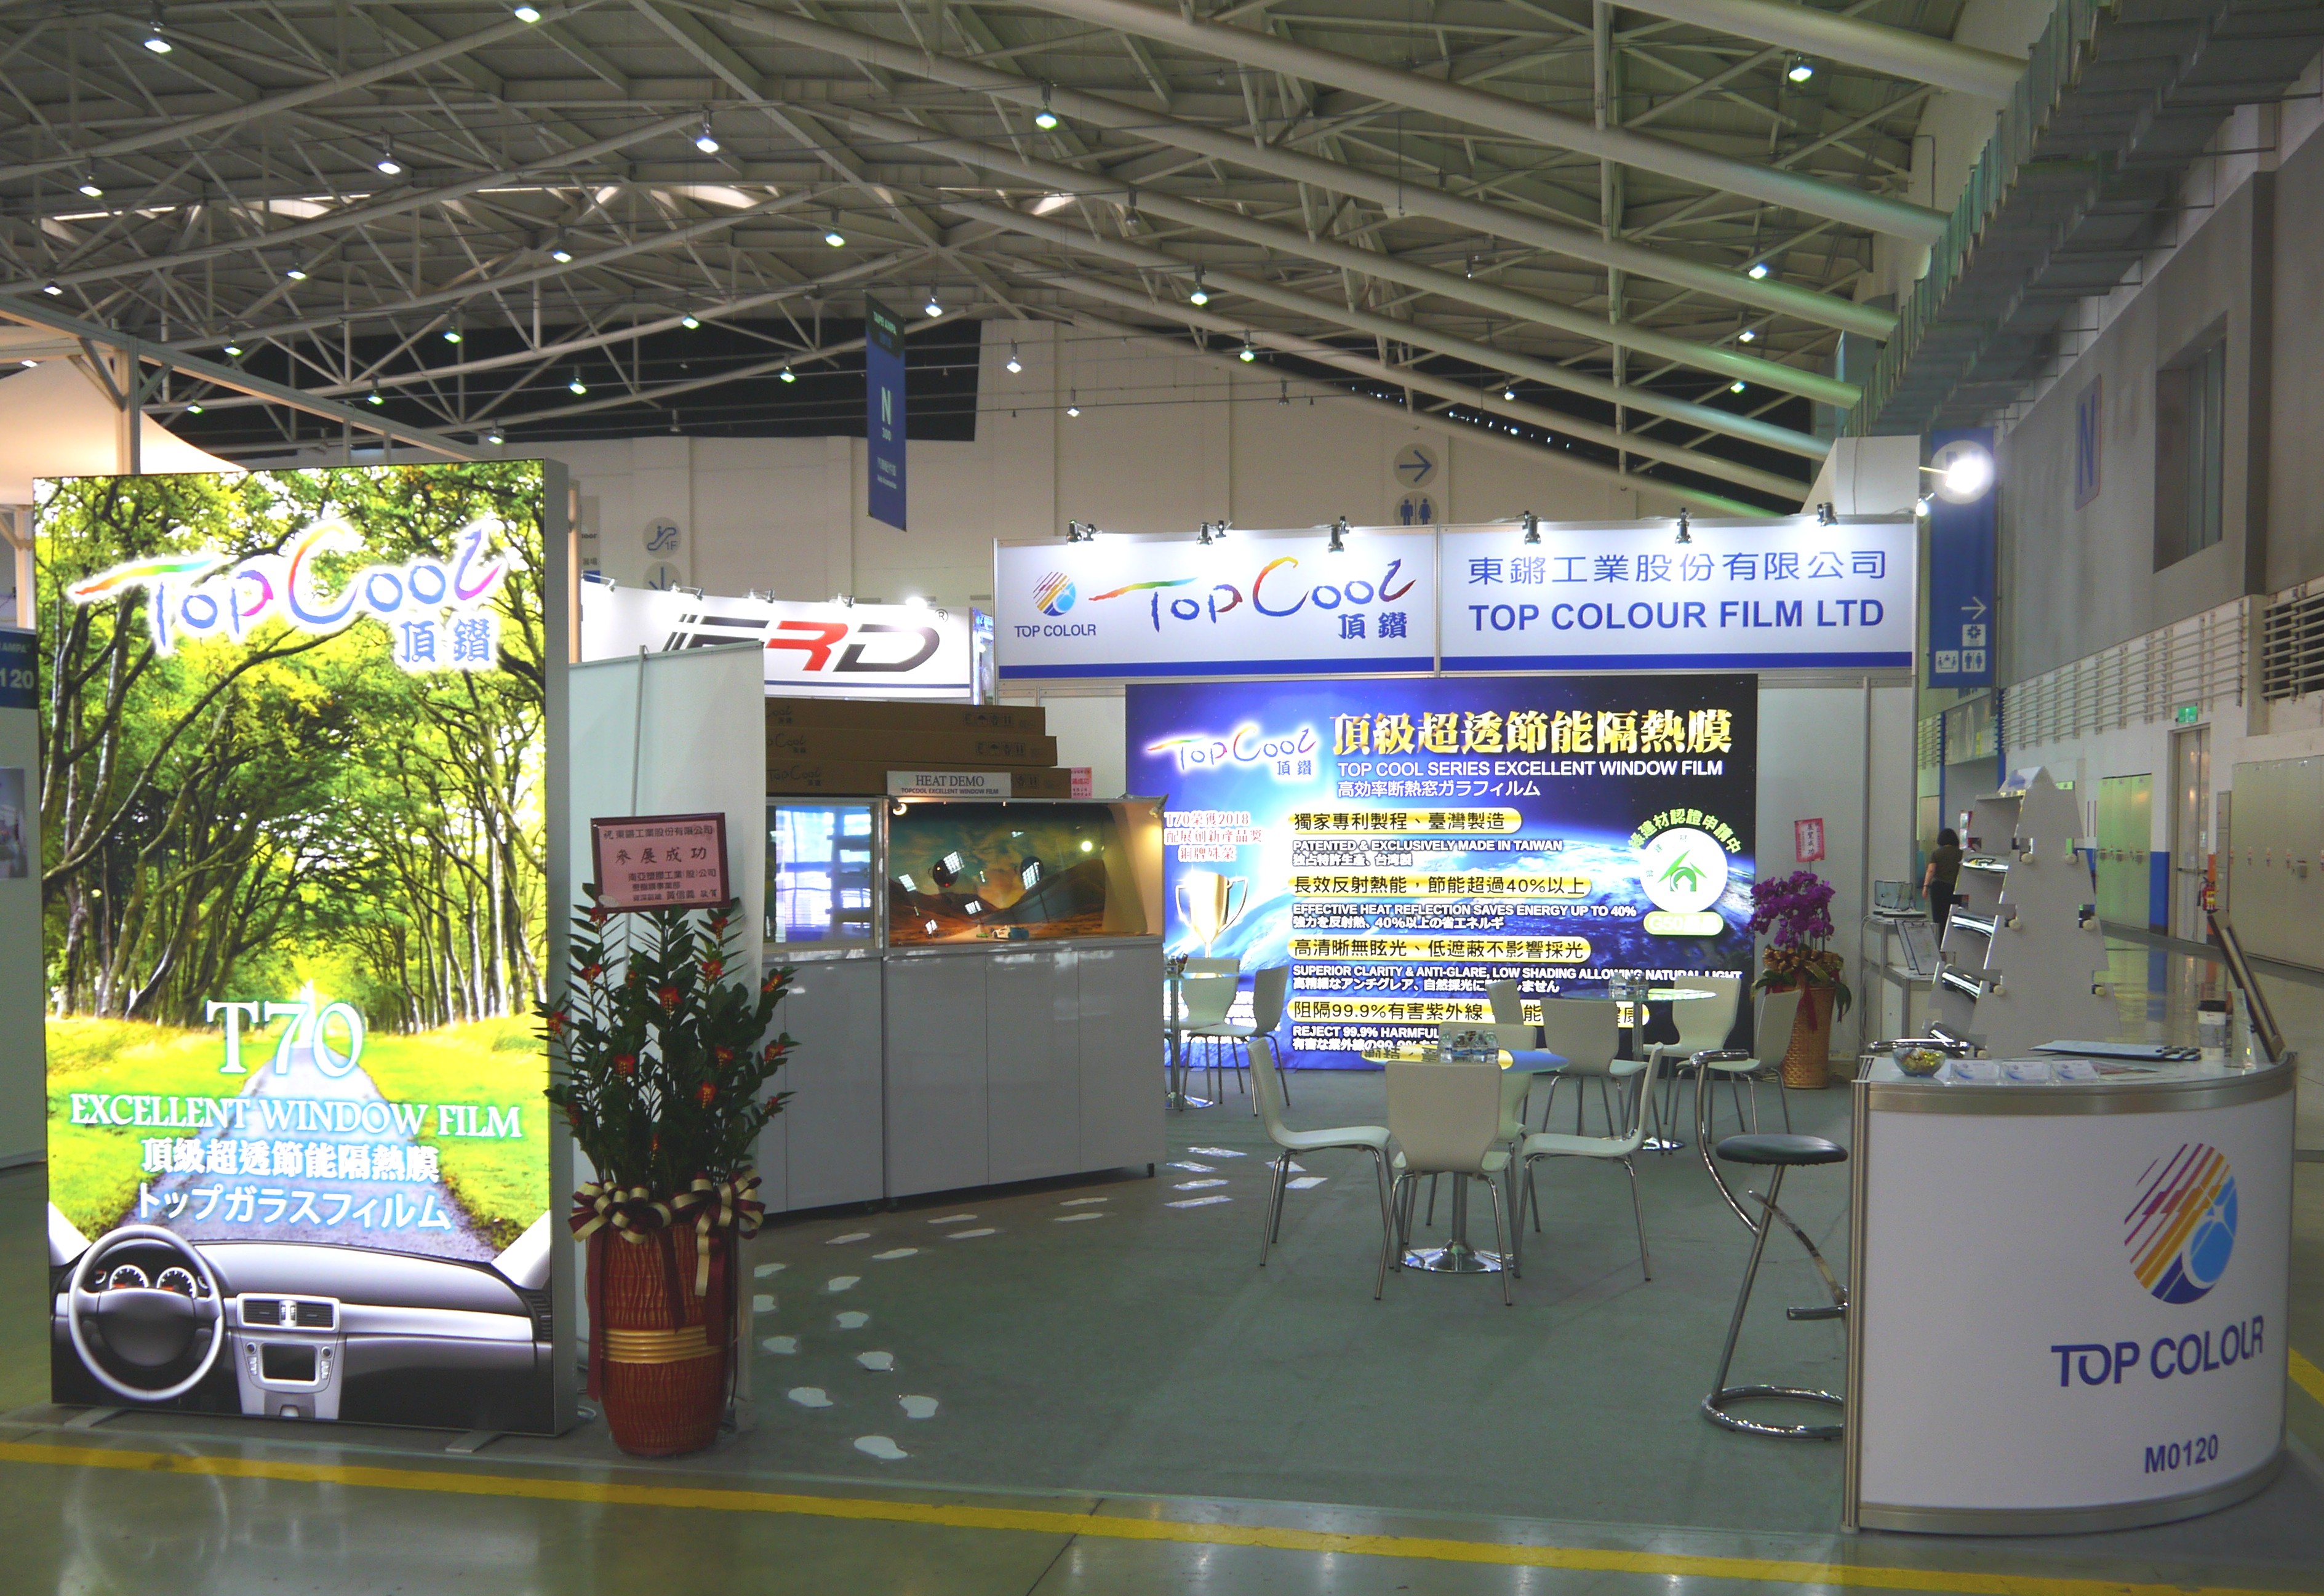 2018 Taipei AMPA Topcolour Booth with TopCool excellent window film simulator